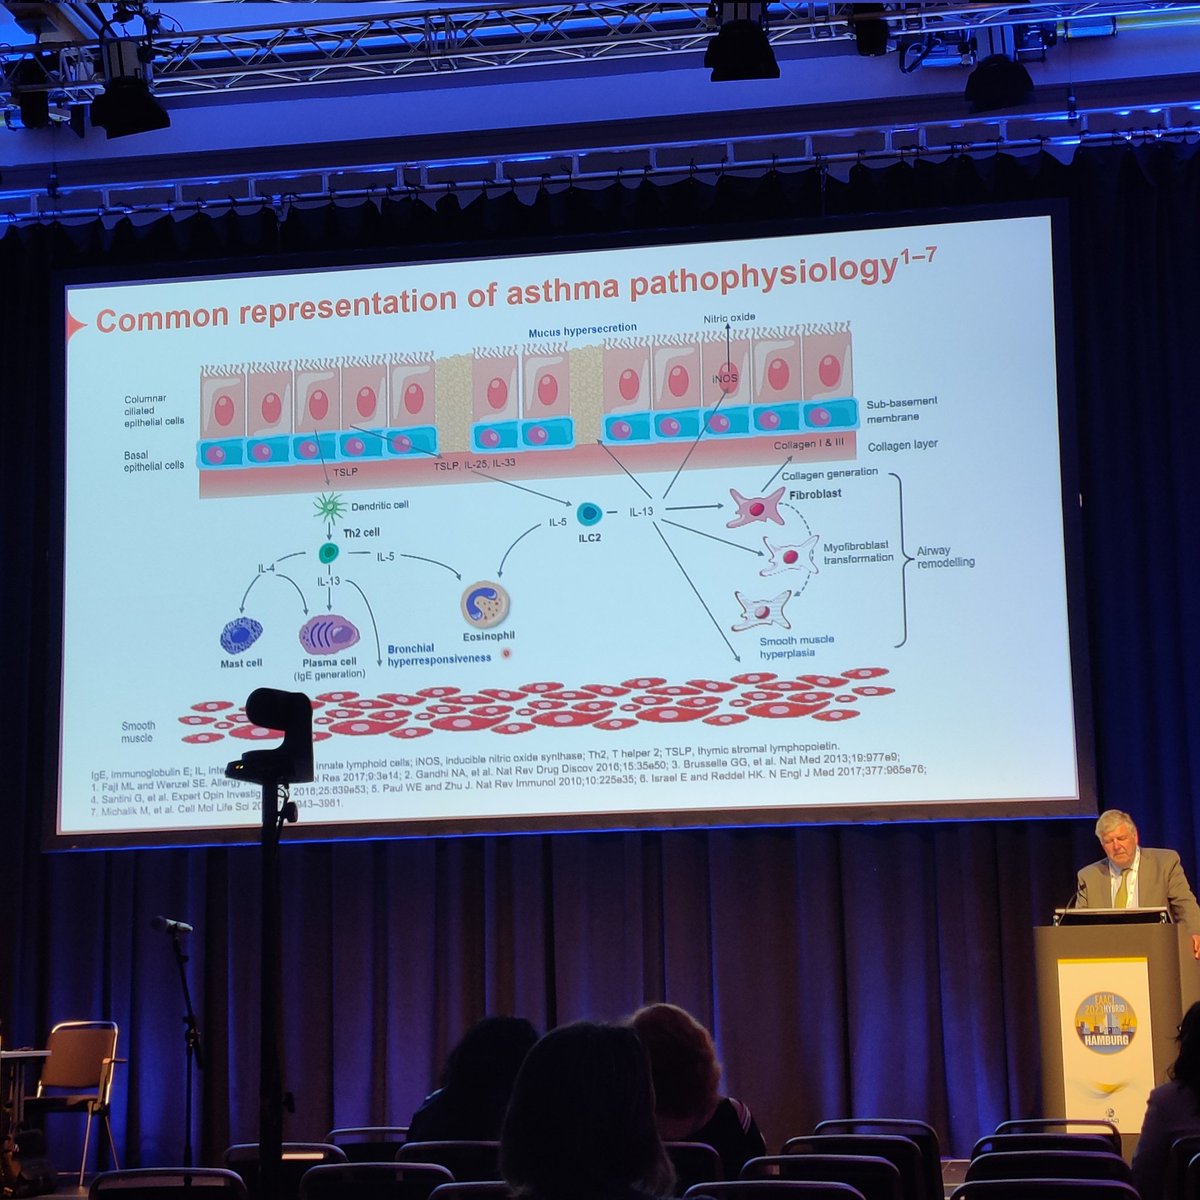 Professor Peter Howarth introduces the session on the role of IL-5 and eosinophils in asthma and CRSwNP #EAACI2023